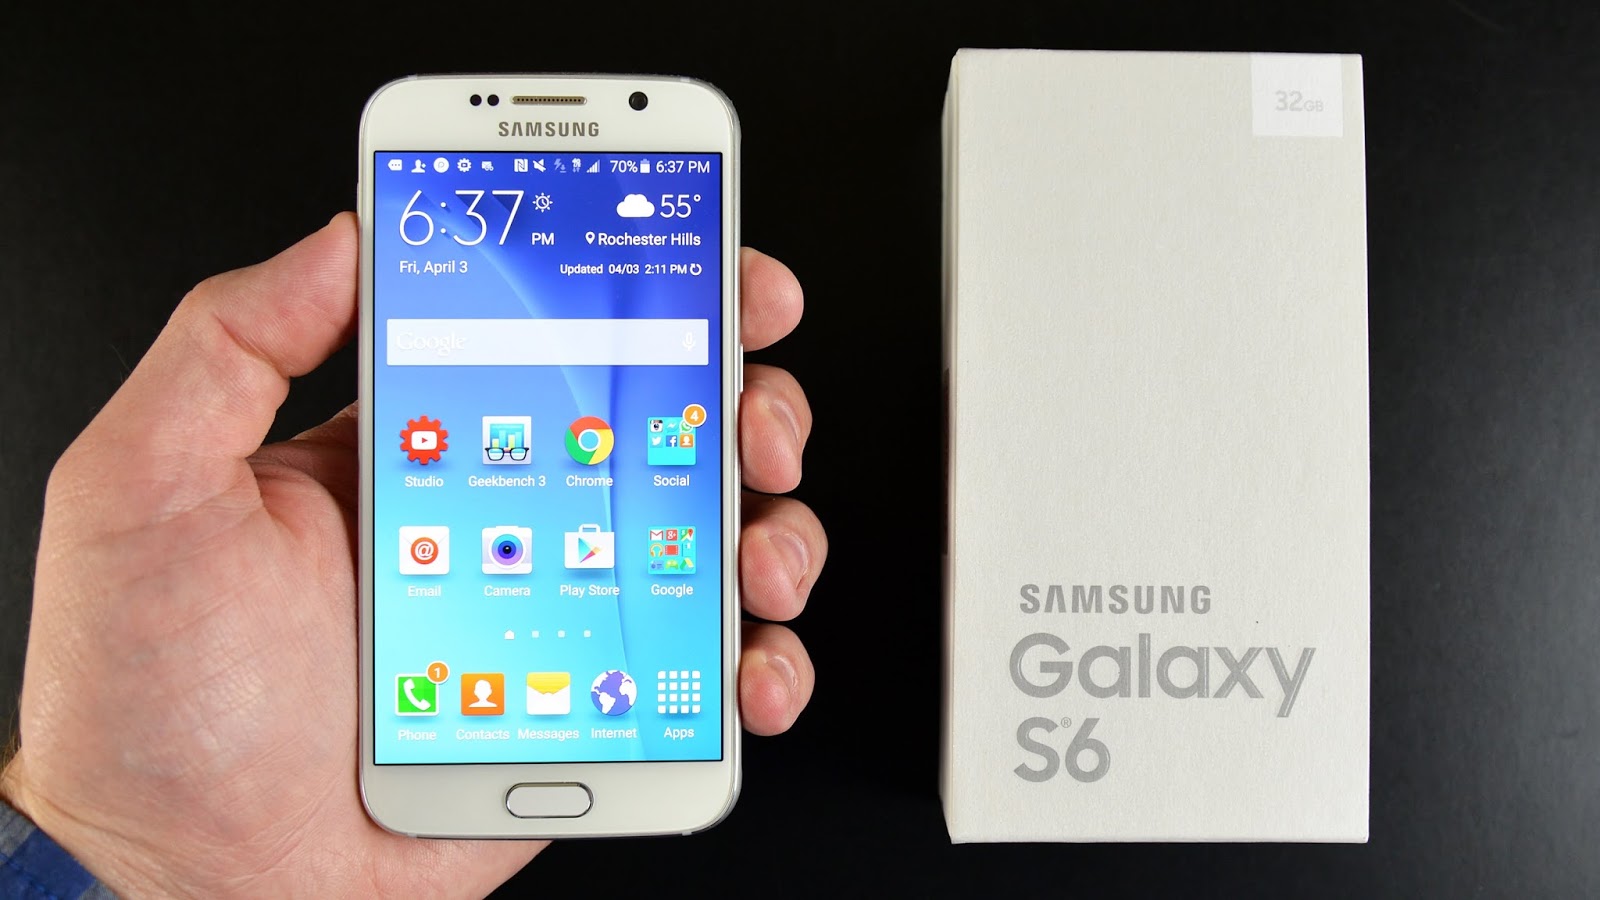 Samsung Galaxy S6 edge plus The Official Samsung Galaxy Site - Samsung Galaxy 6 Edge Plus